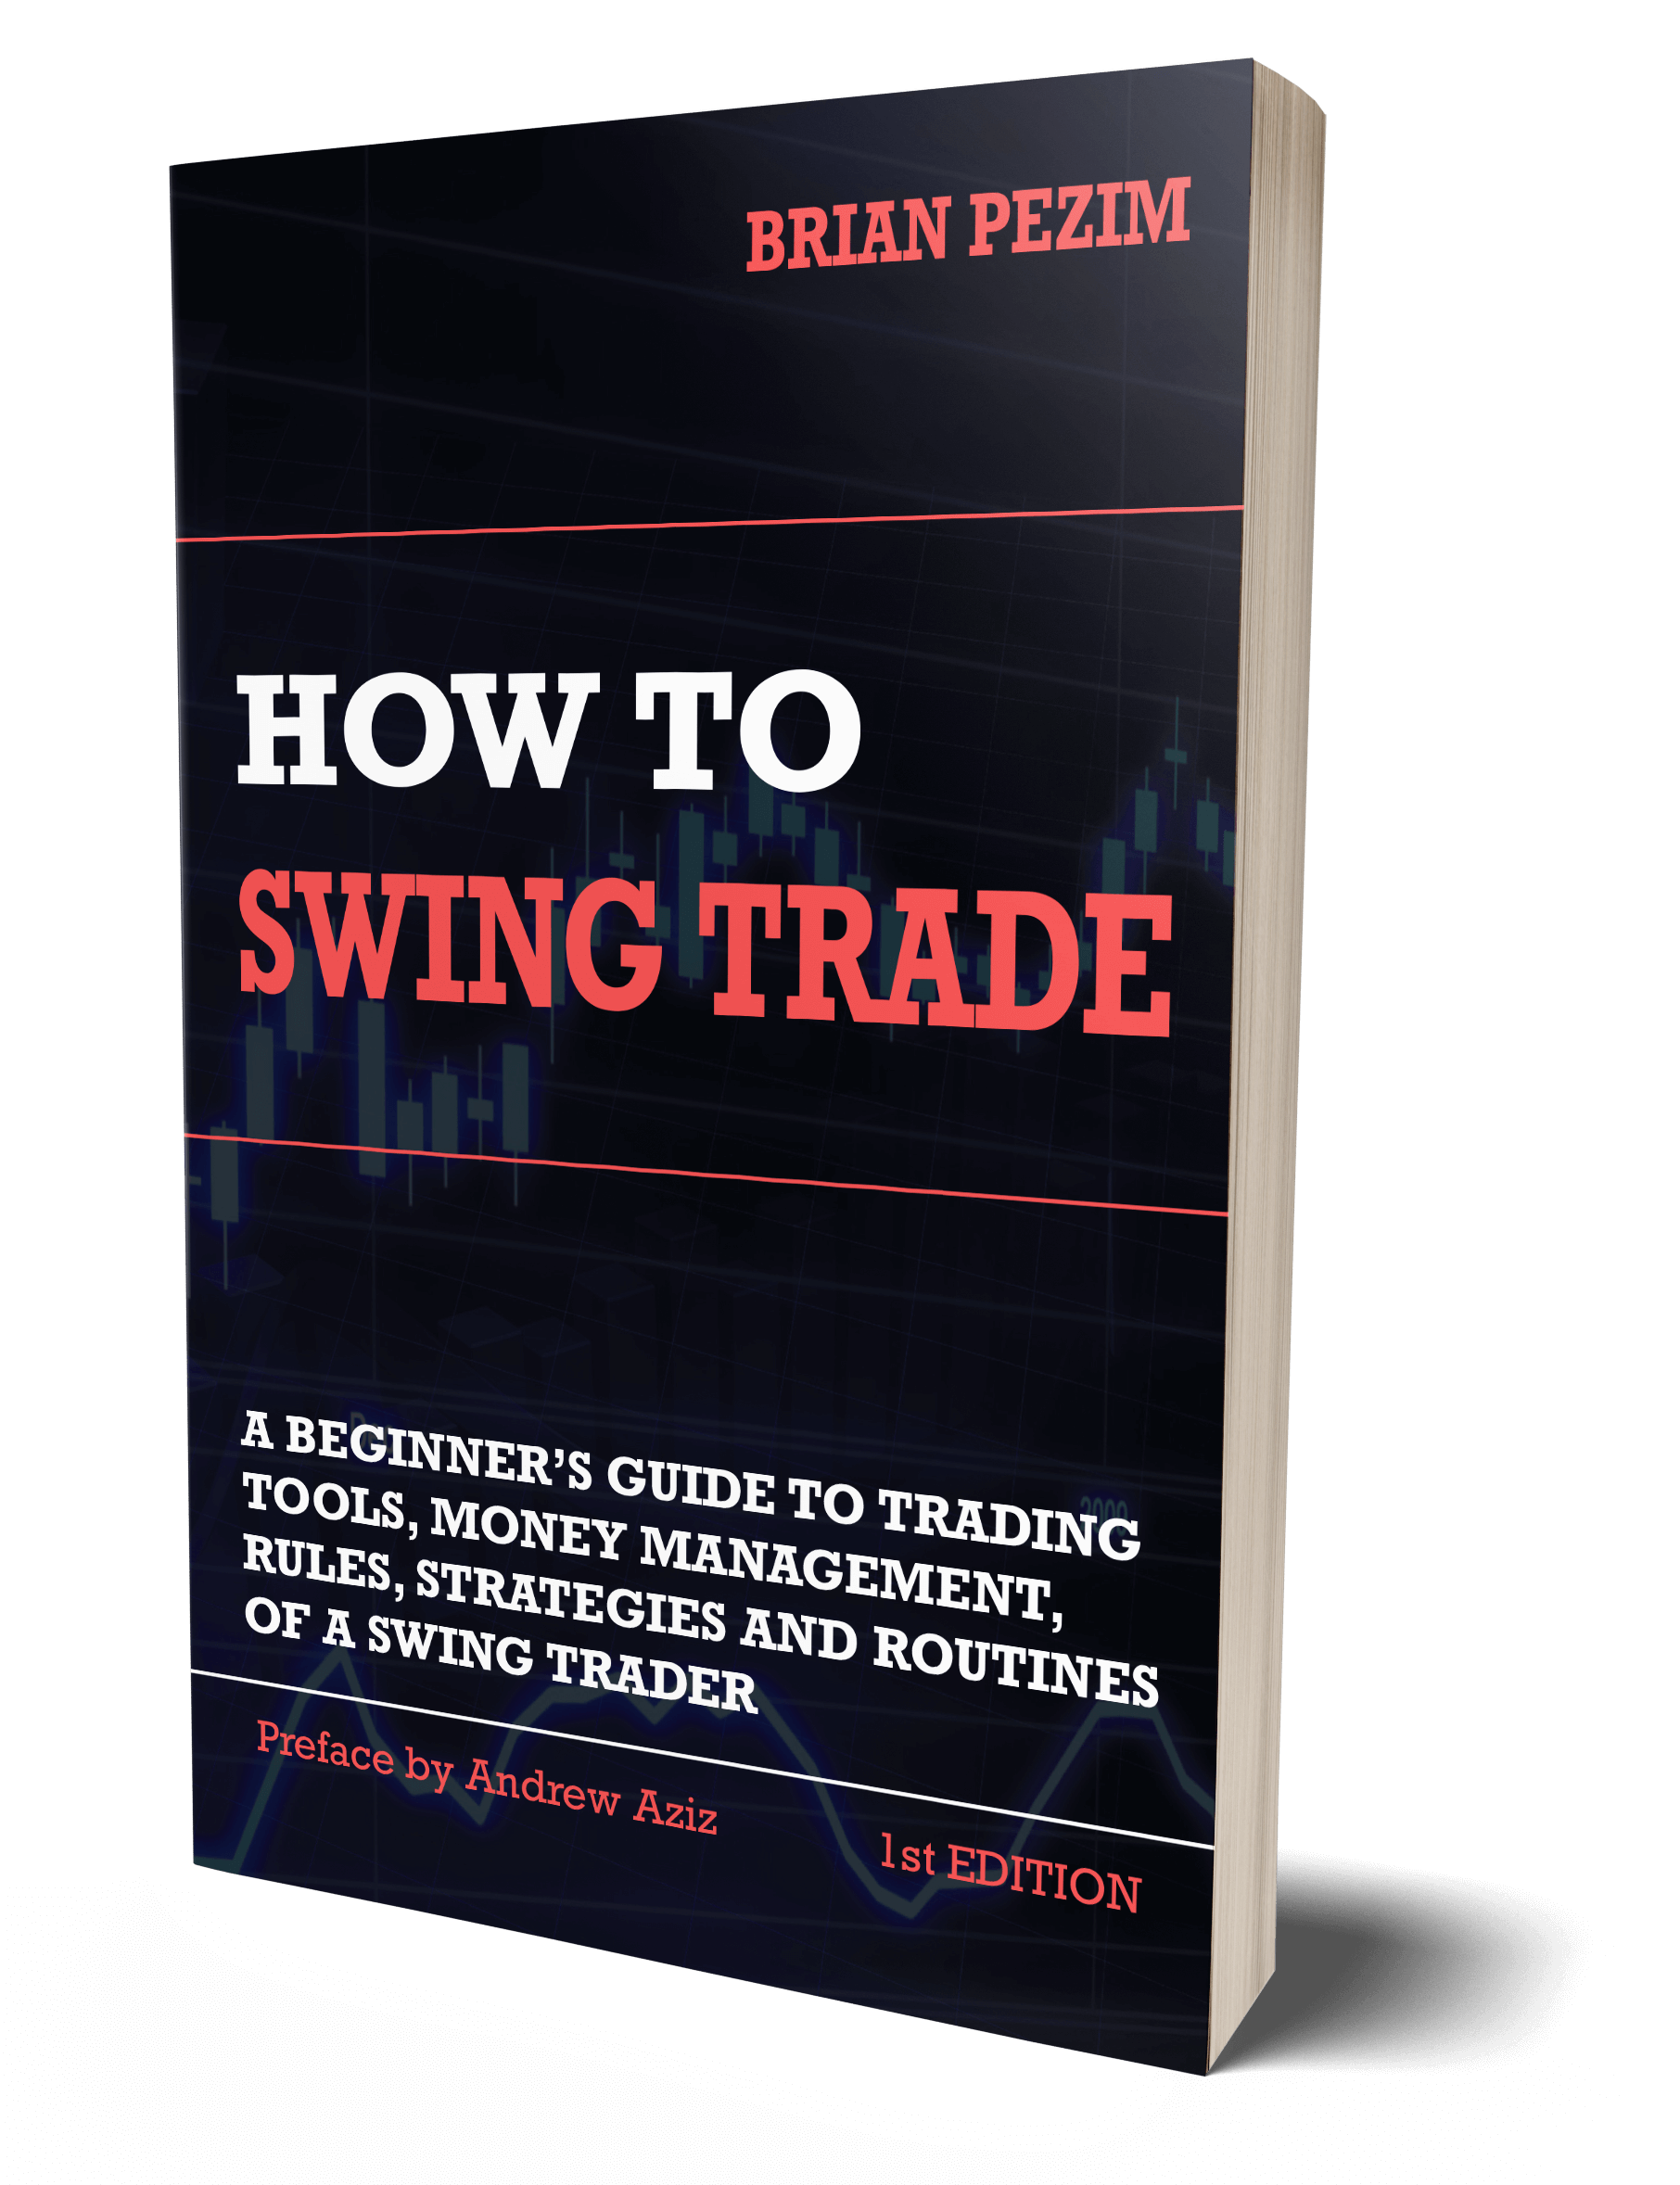 How to swing trade book cover